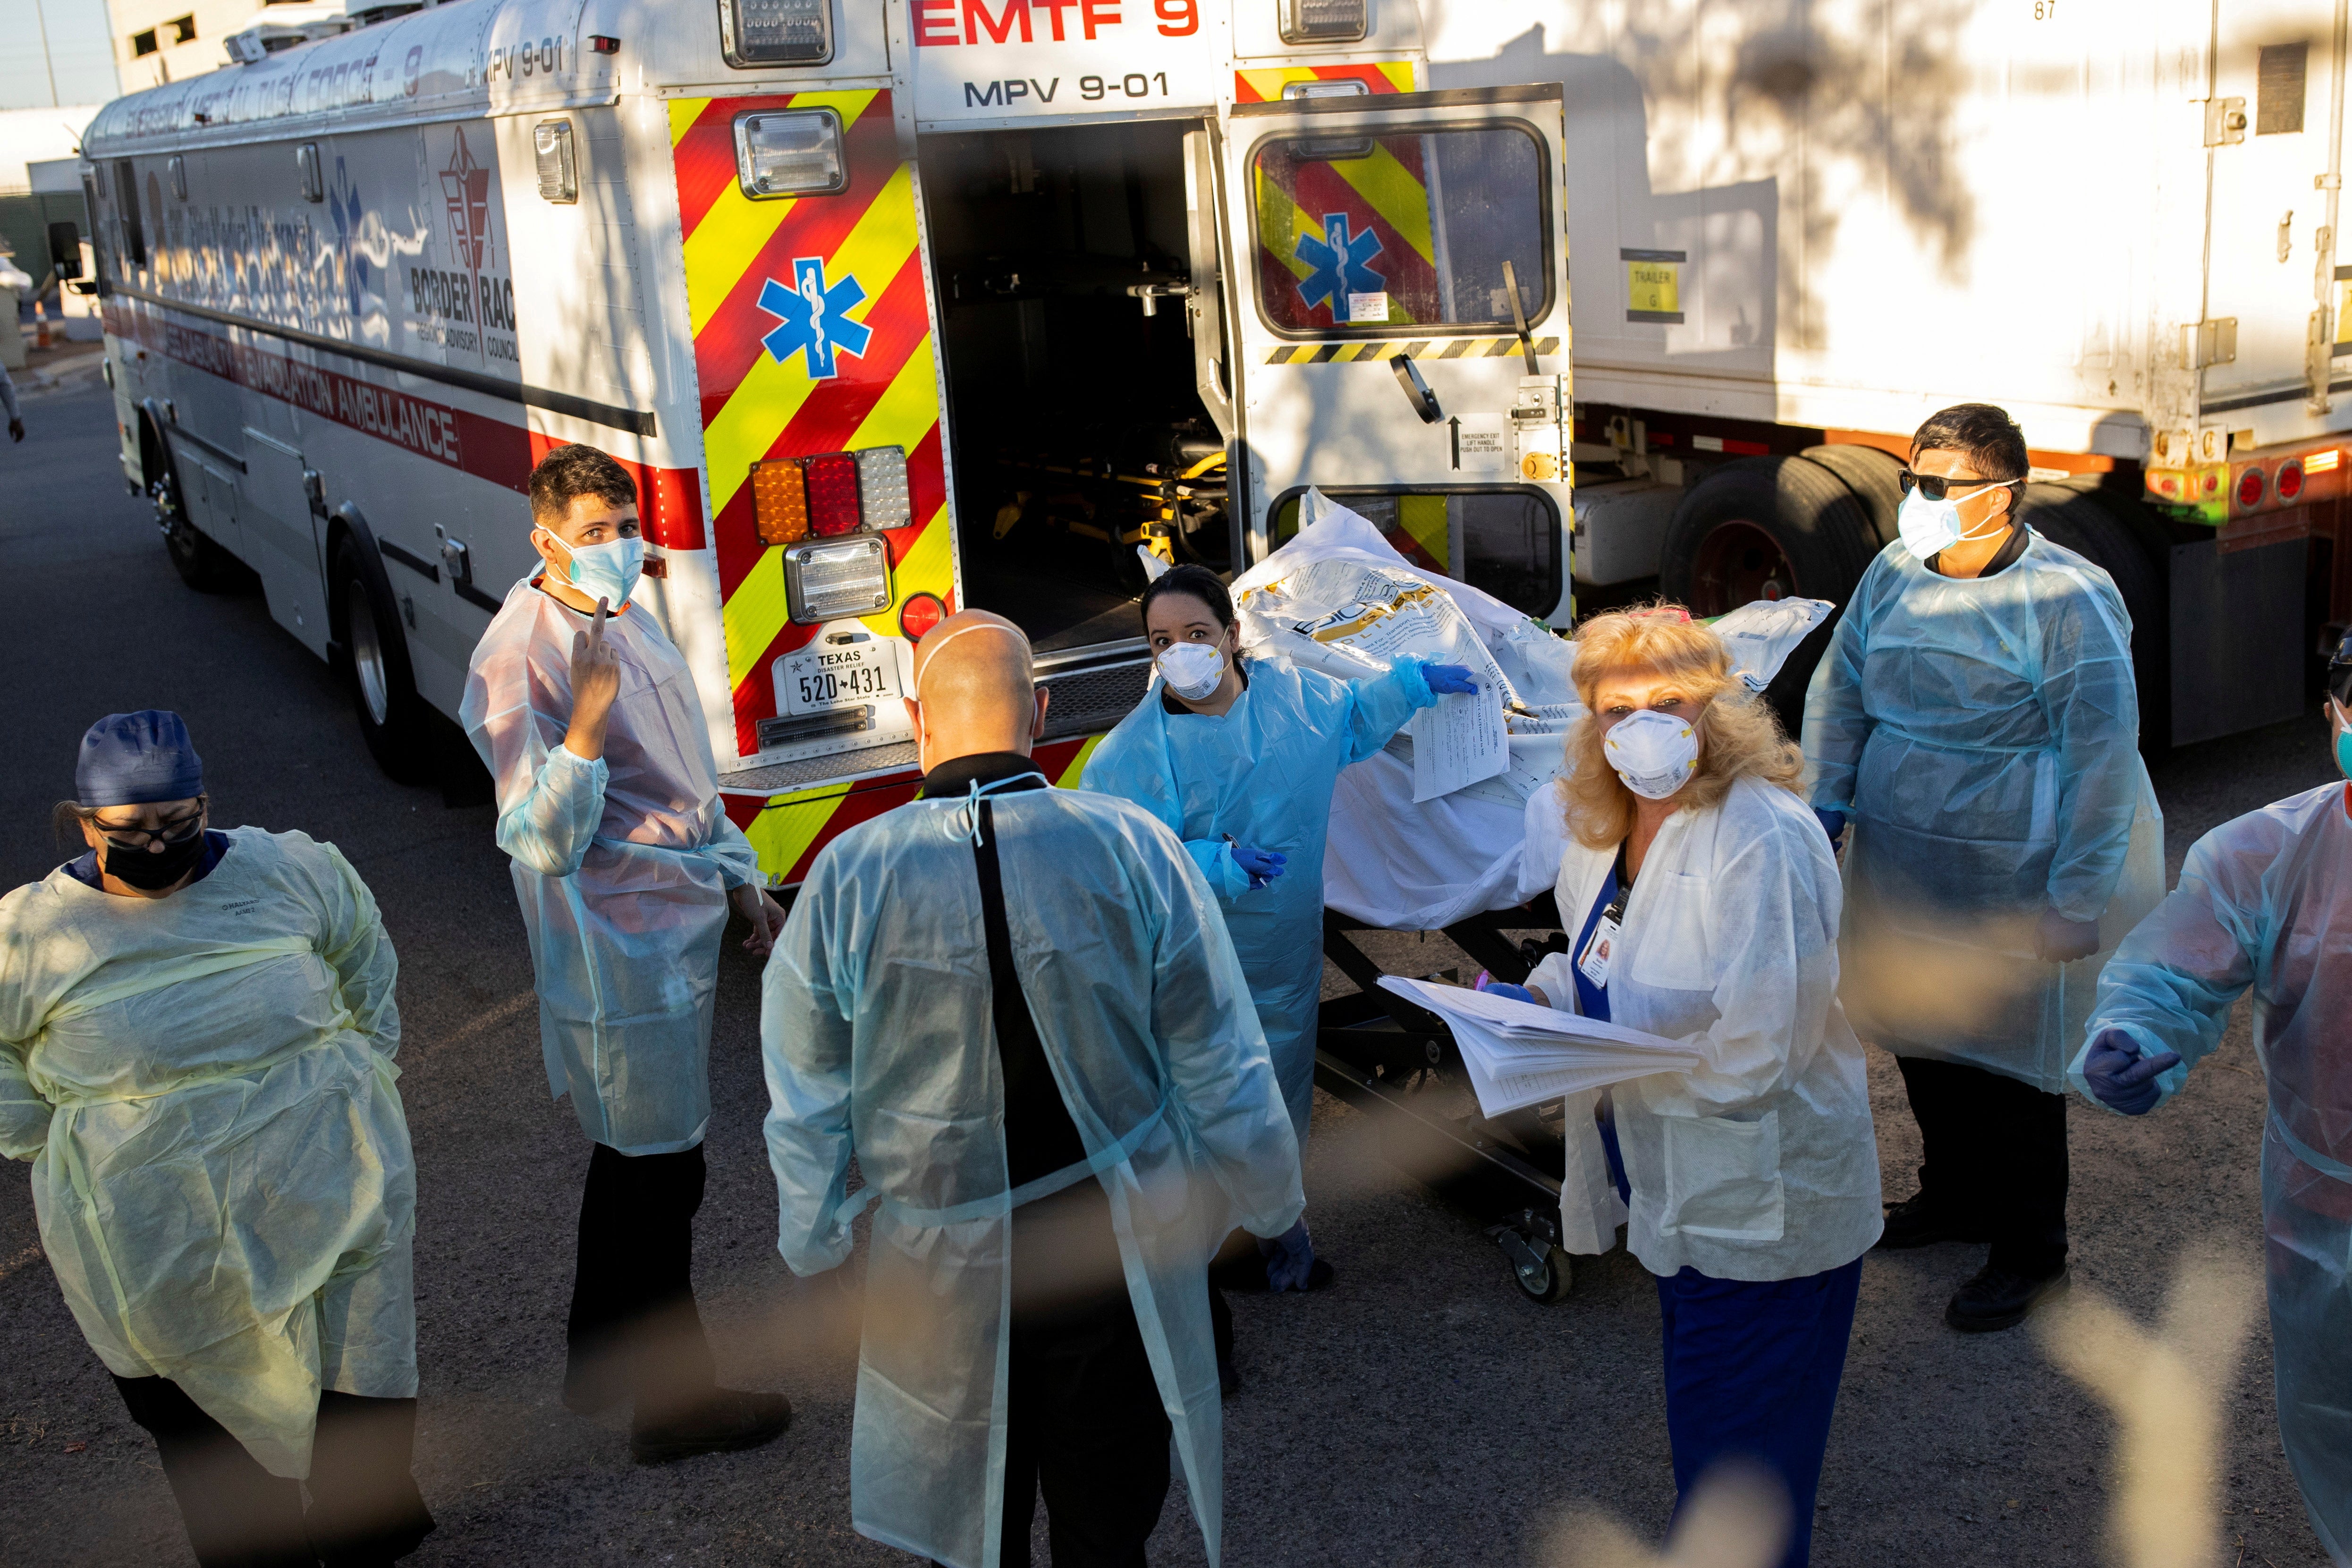 Medical workers in gowns and masks stand outside a refrigerated trailer.